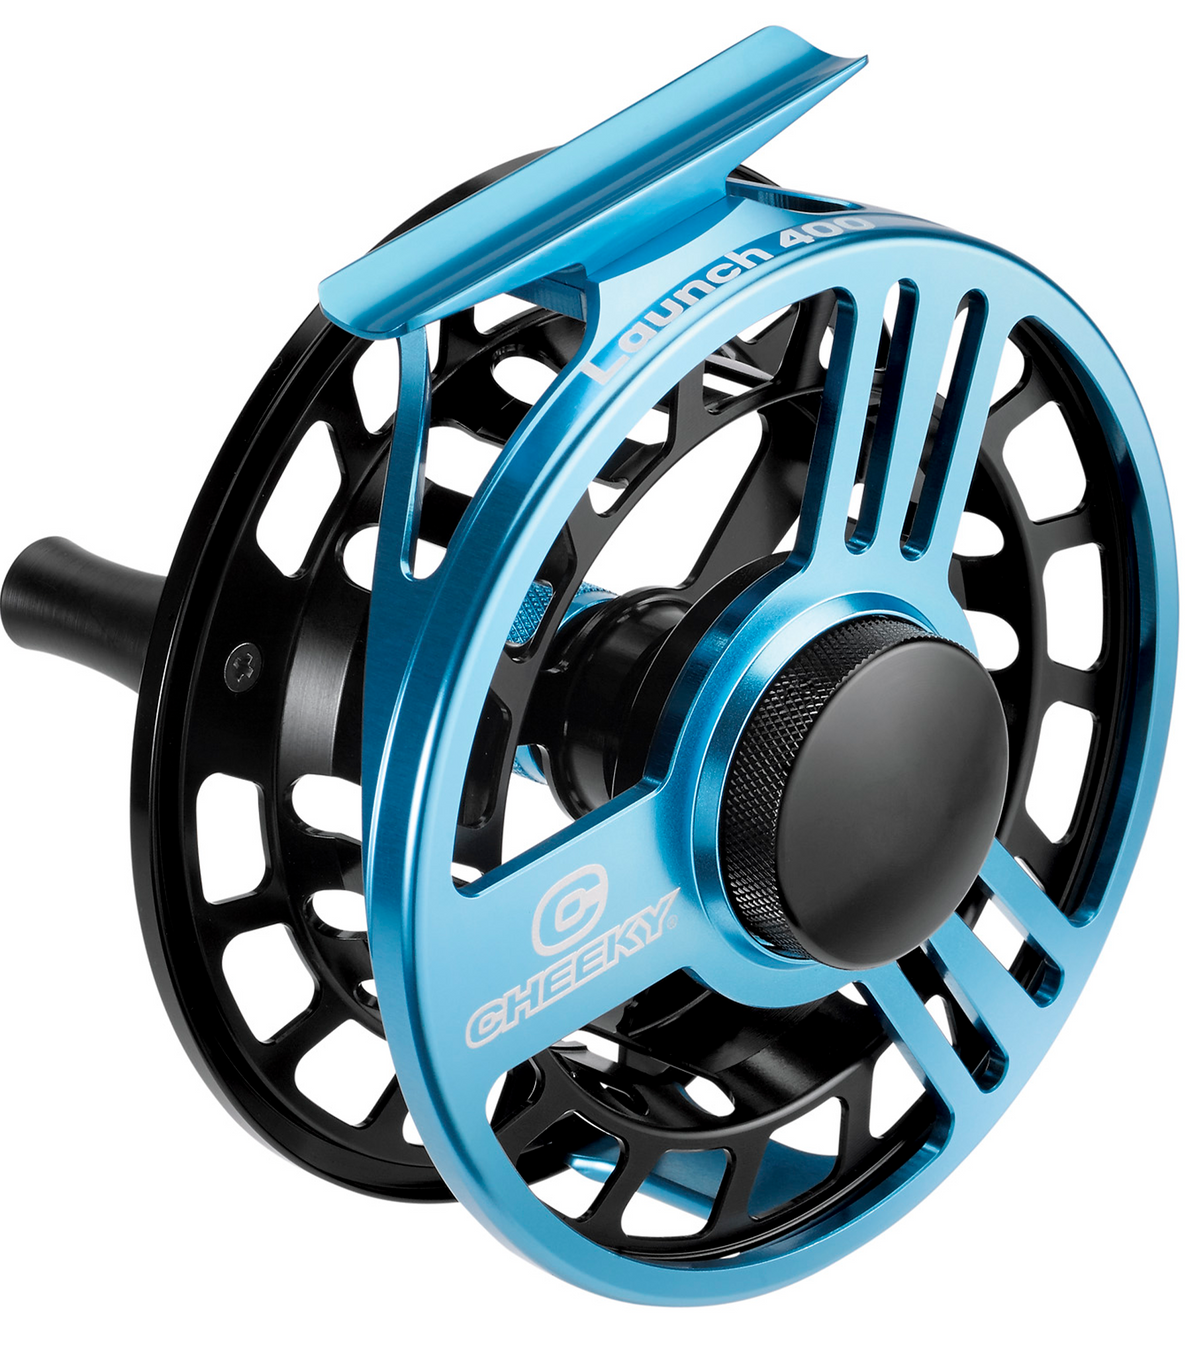 Buy Launch 400 Fly Fishing Reel online from Cheeky Fishing - Cheeky Fishing